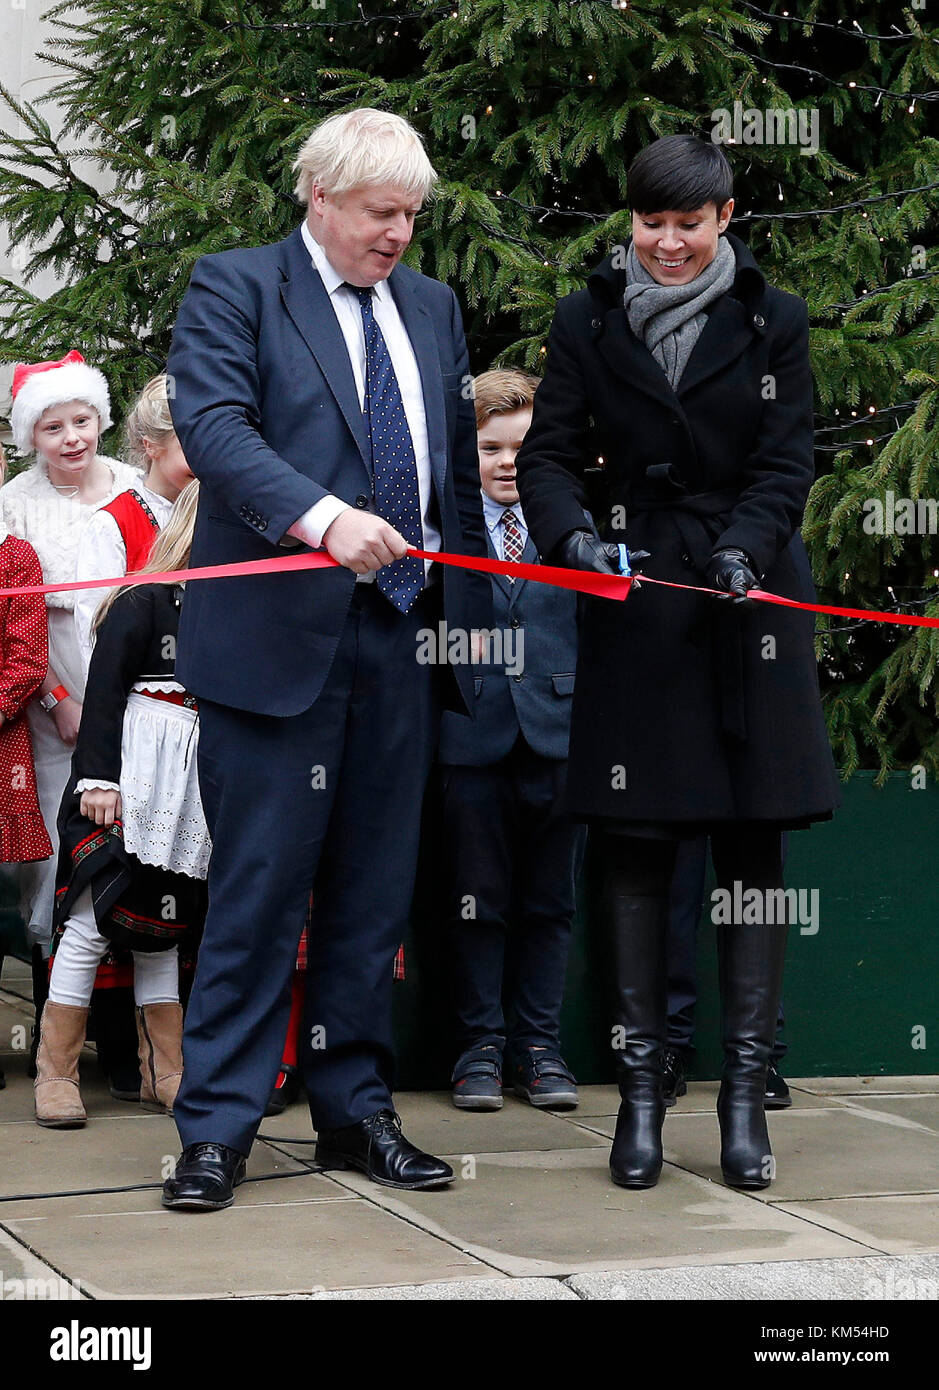 Foreign Secretary Boris Johnson with Norway's Foreign Secretary Ine Eriksen Soreide as she cuts a ribbon during the unveiling of a Christmas tree, gifted by Norway, outside The Foreign and Commonwealth Office (FCO) in London, after their bilateral talks. Stock Photo